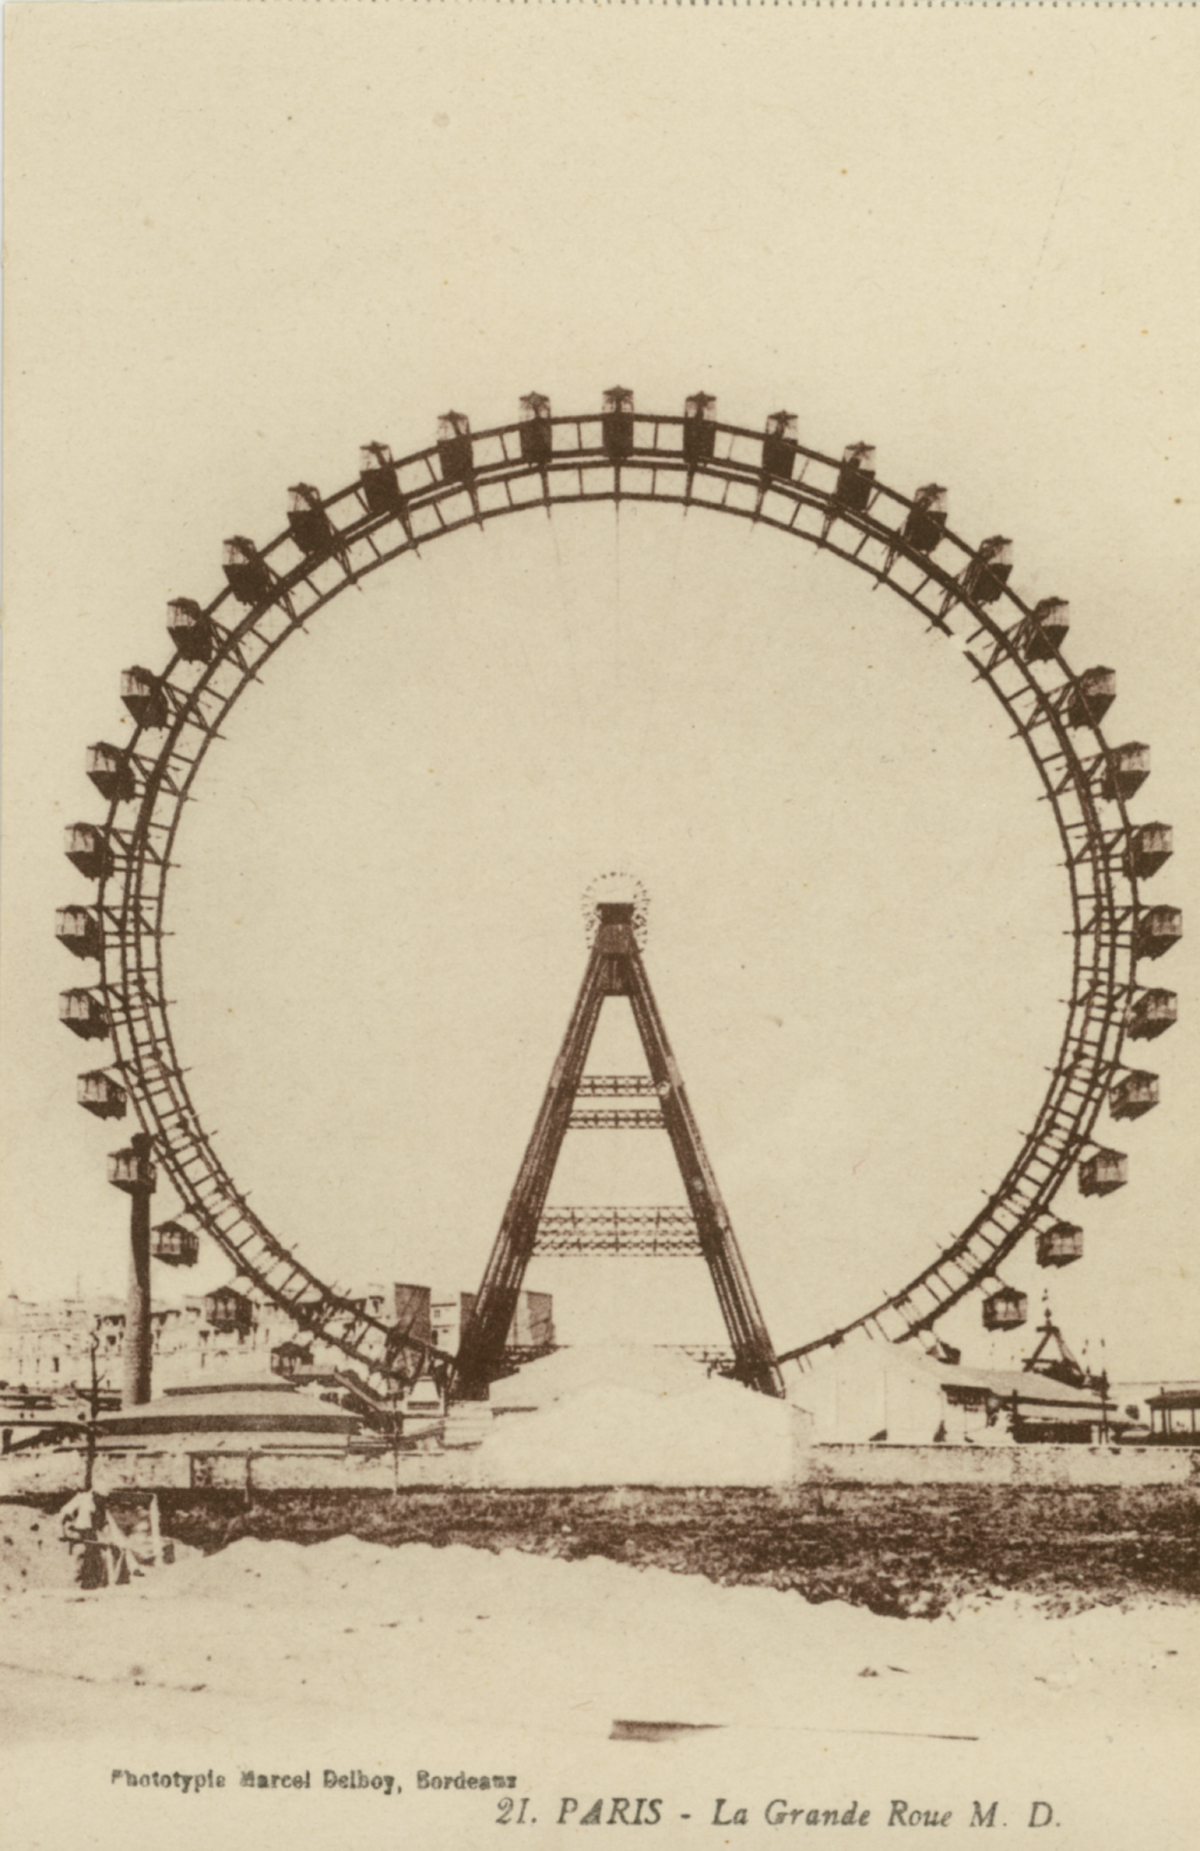 Look closely at the cars on the Ferris Wheel.  They're huge--like small train cars almost--exactly what I imagined the cars on the original Ferris Wheel looked like at the 1893 World's Fair in Chicago.  This Ferris Wheel appears to have been located in Paris, according to the writing on the bottom of the photo.  I can't be absolutely positive, obviously (if anyone just so happens to be sure of the location, please let me know).  According to my estimation (some of the cars are obscured by the building at the bottom), it even has 36 cars, like the original Ferris Wheel.

I read in The Devil In The White City (a fantastic book by Erik Larson) that each of the cars on the original Ferris Wheel weighed 13 tons, bringing the total to about 1 million tons.